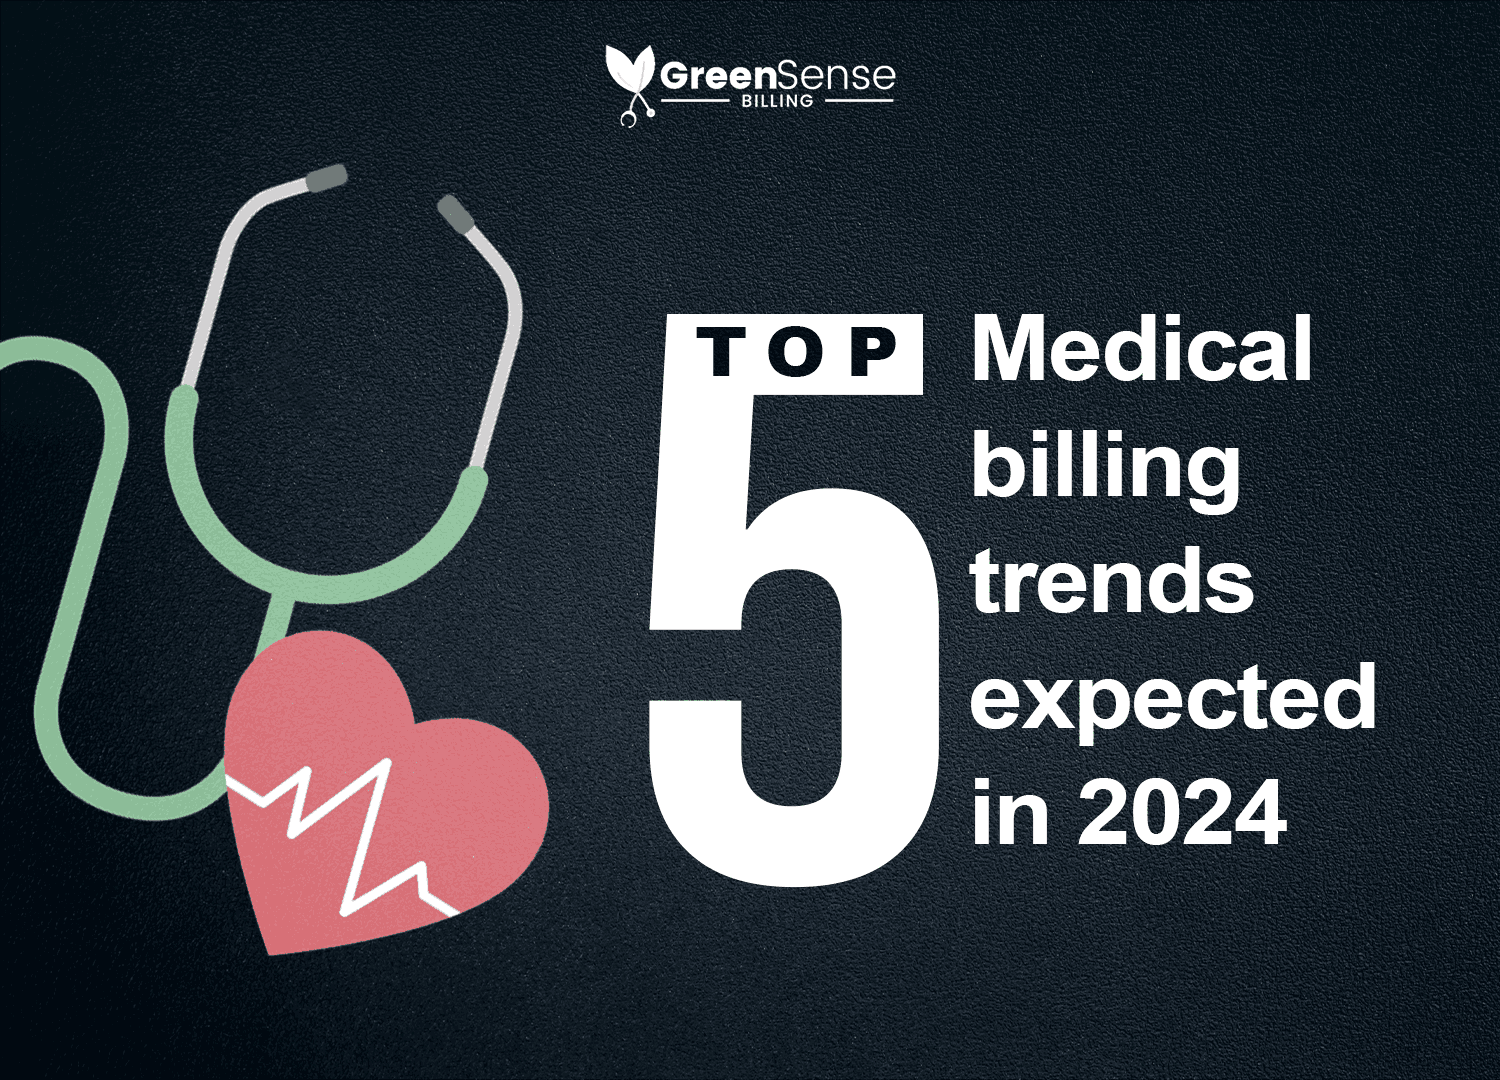 Top 5 medical billing trends to be expected in 2024